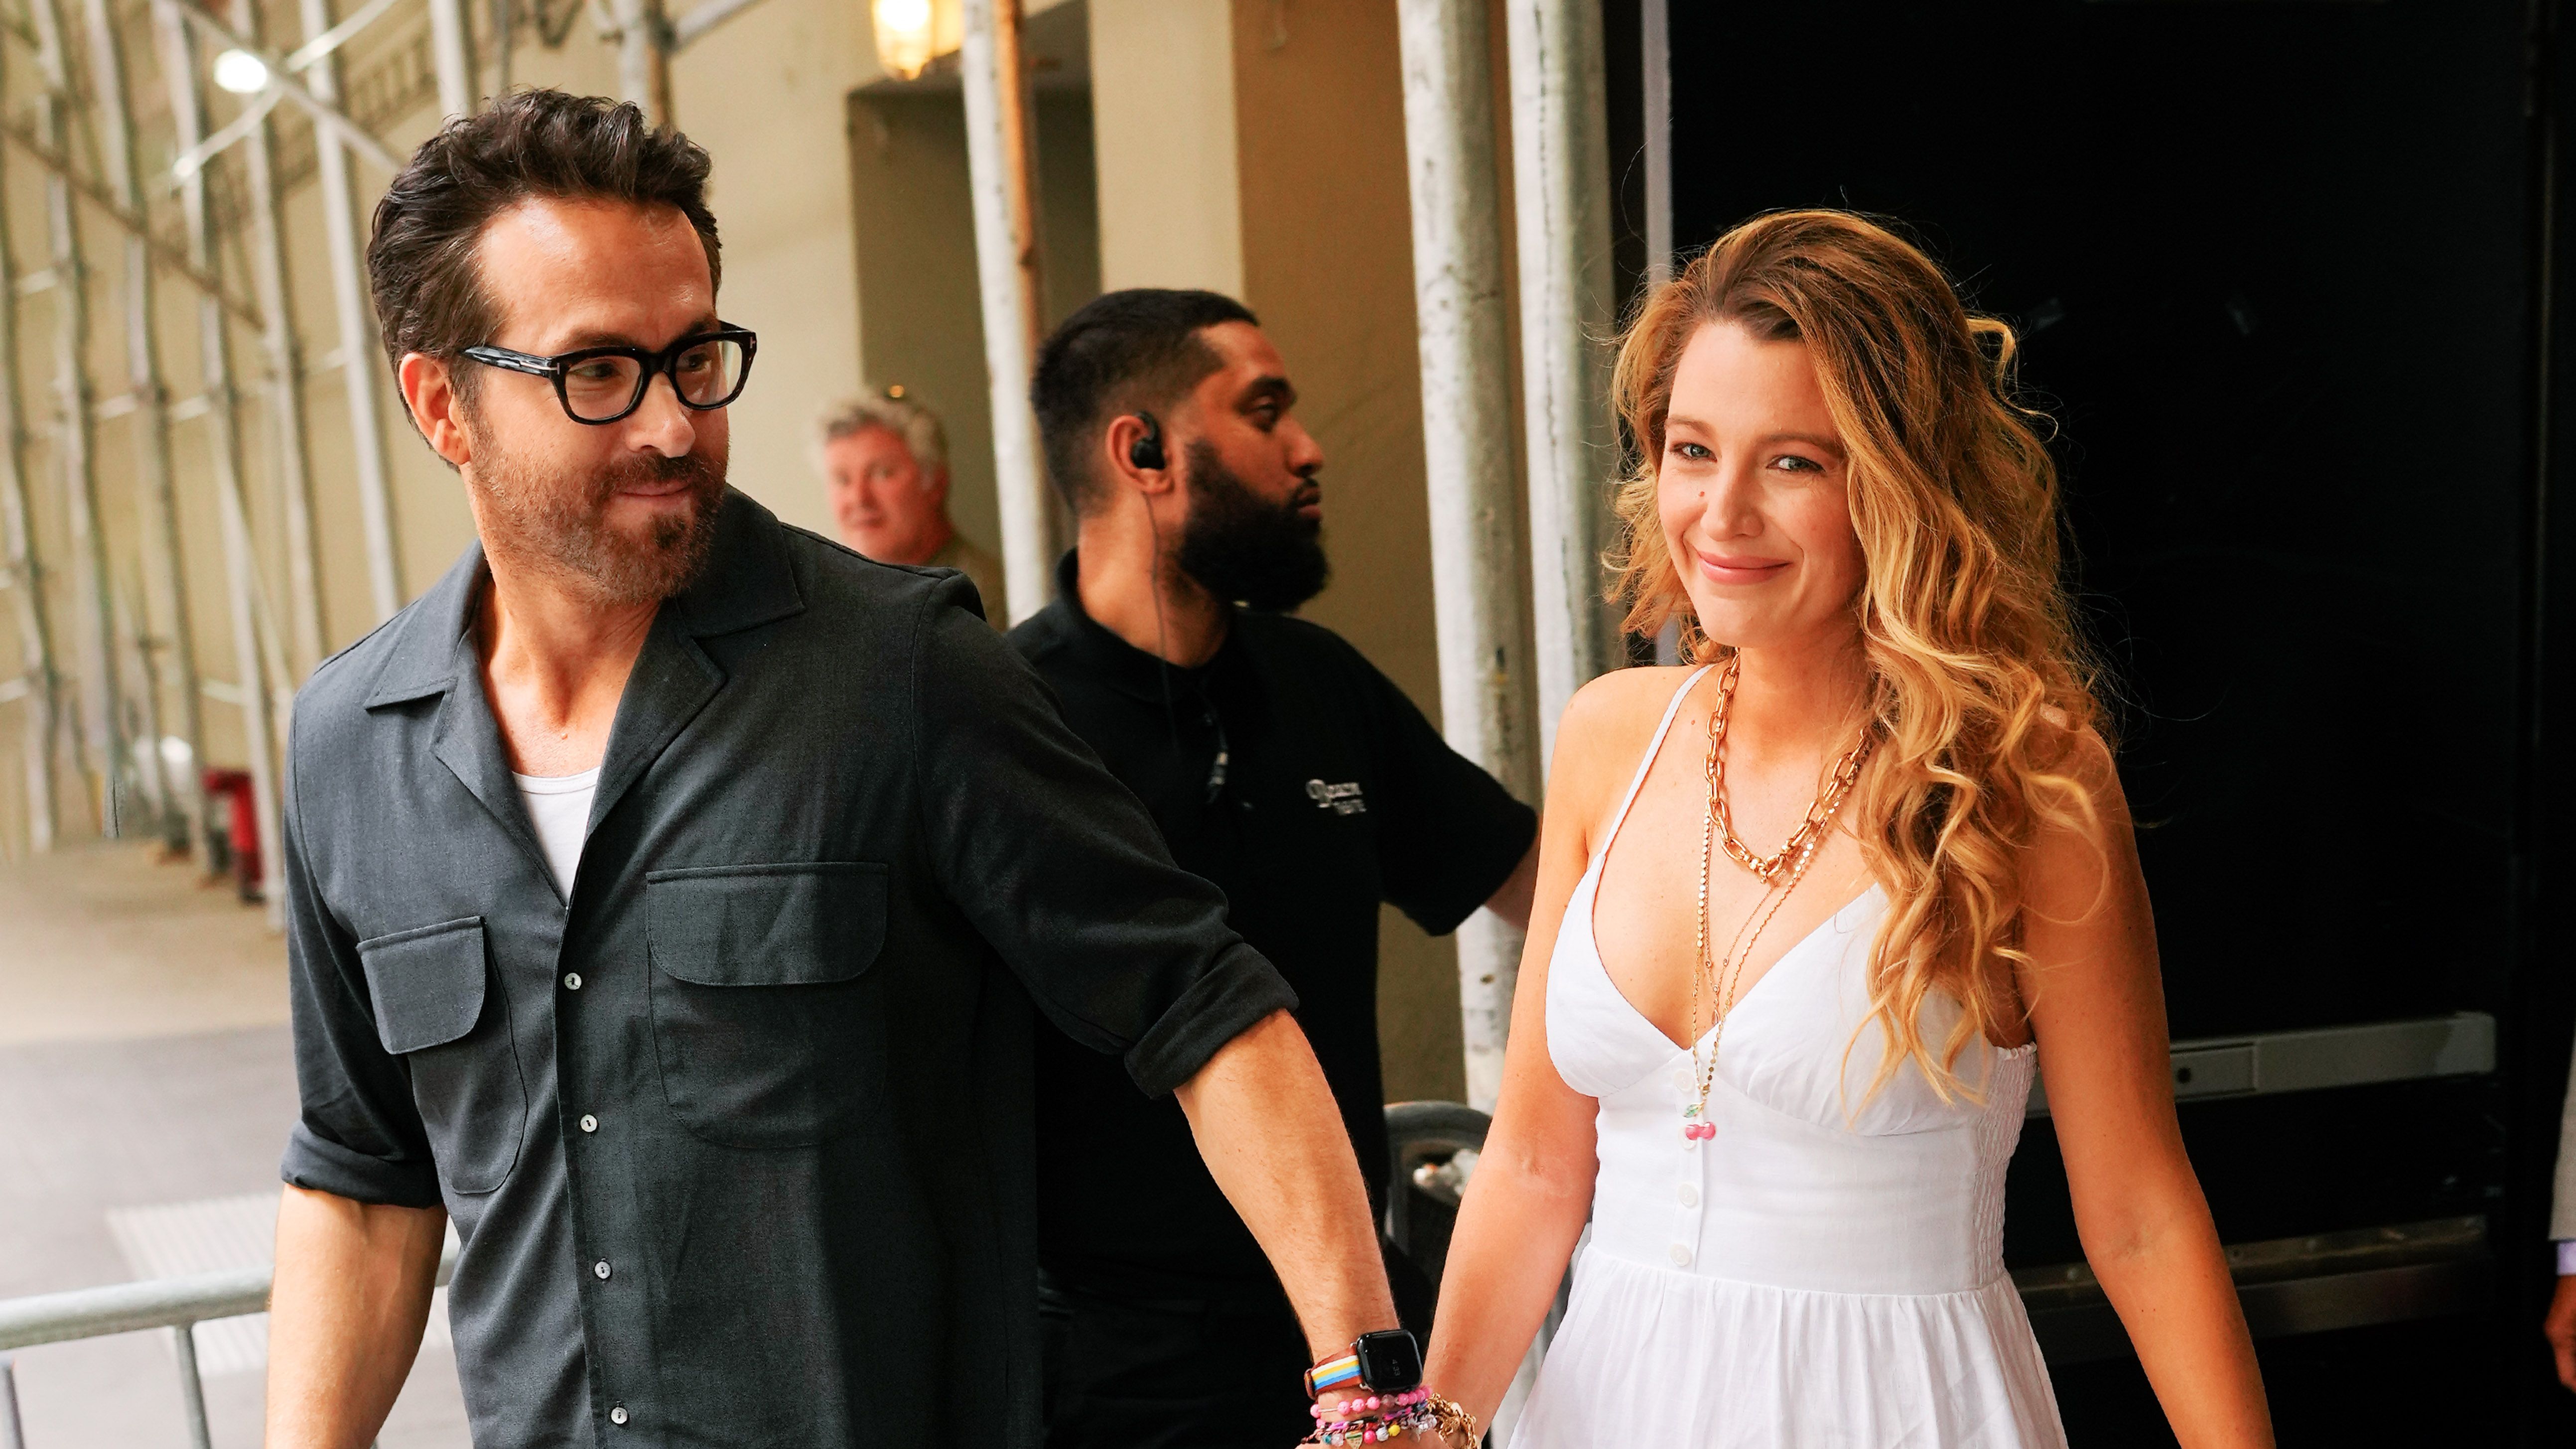 https://hips.hearstapps.com/hmg-prod/images/ryan-reynolds-and-blake-lively-depart-the-beacon-hotel-on-news-photo-1668789970.jpg?crop=1xw:0.72717xh;center,top